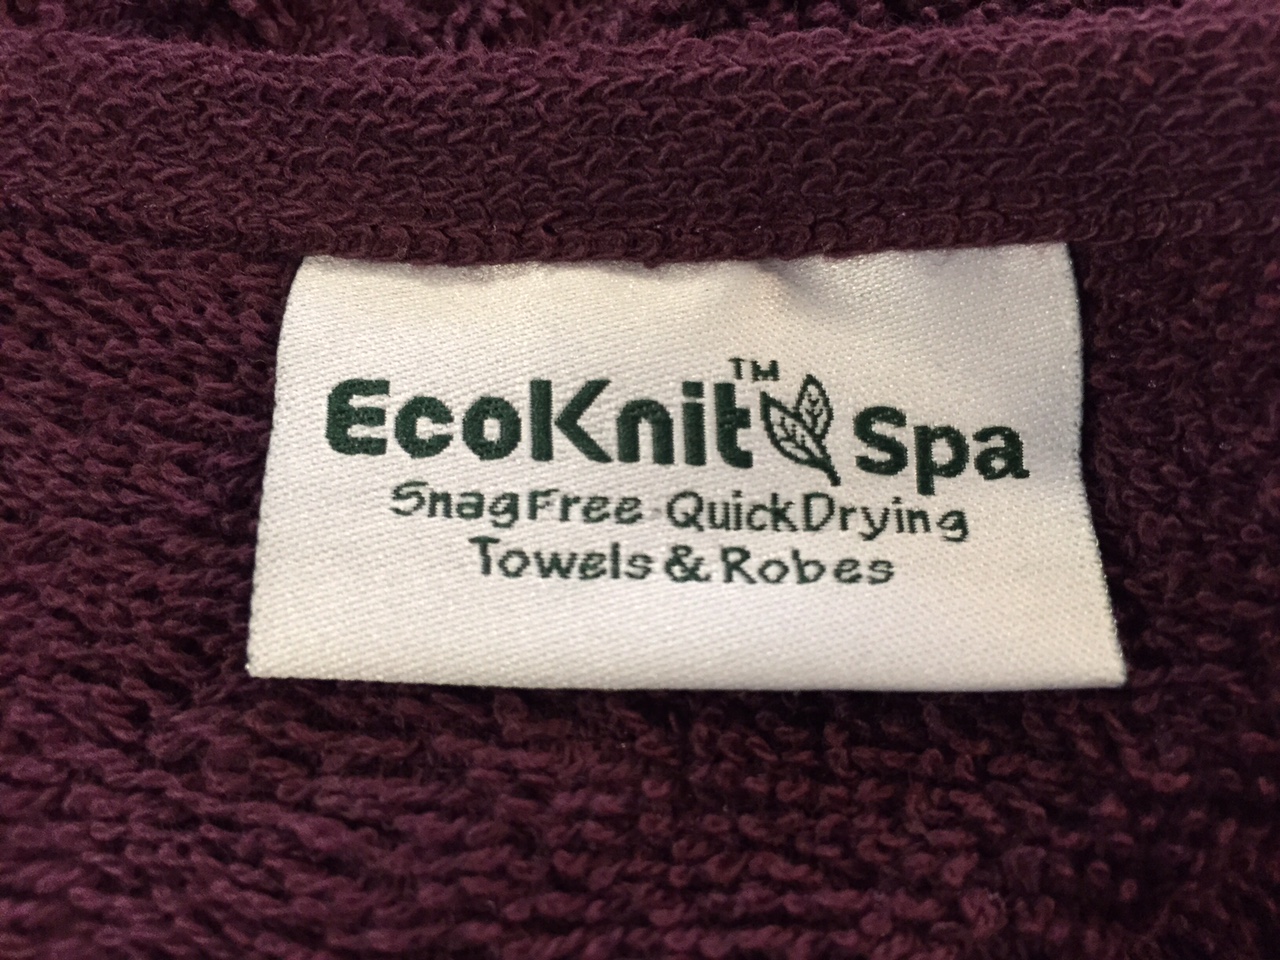 EcoKnit® Spa Launch